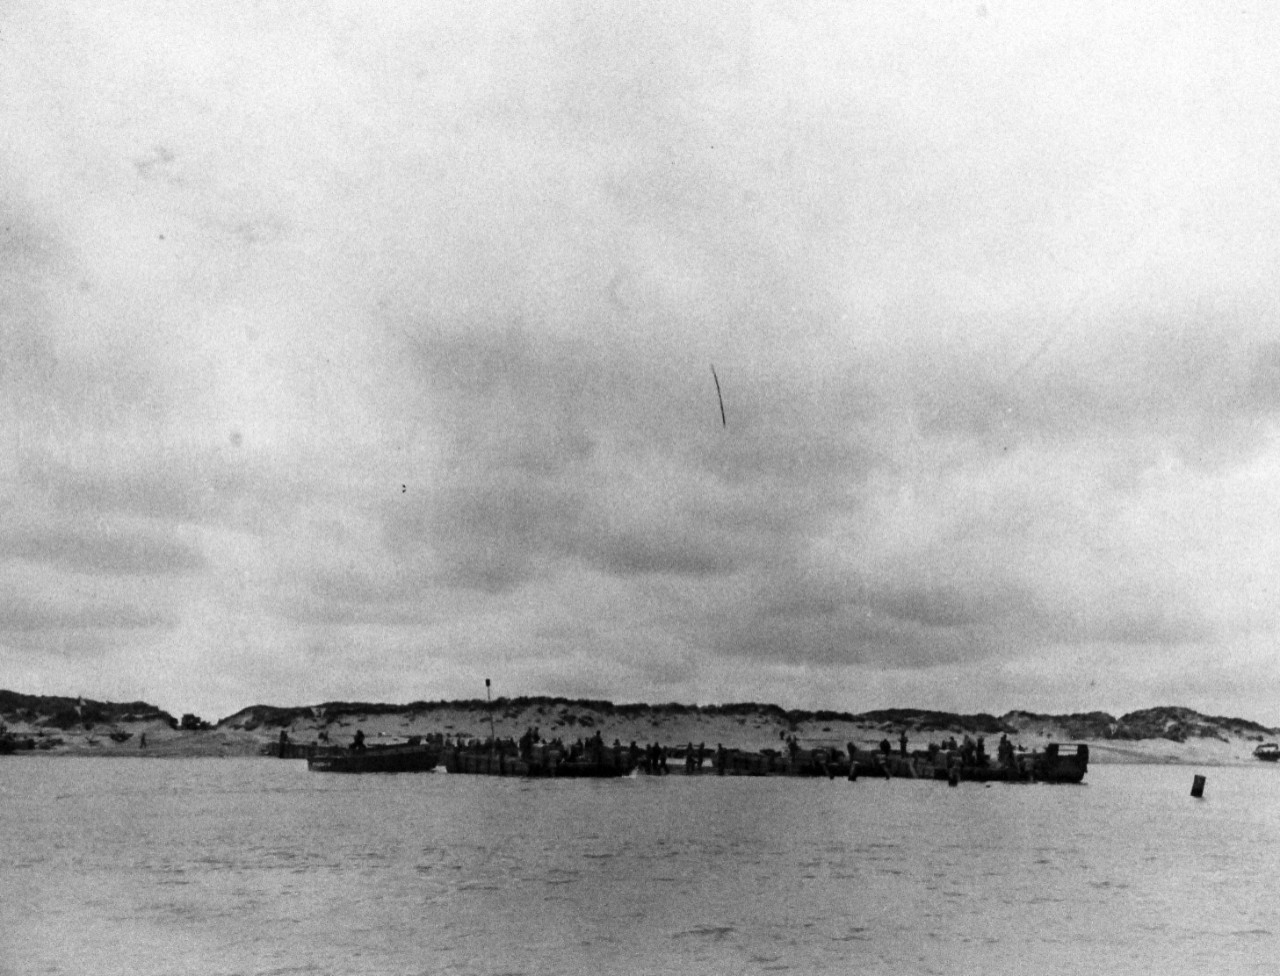 80-G-285134:  Normandy Invasion, Mulberries, June 1944.   The pontoon causeway at “Utah” beach, forming part of the U.S. Mulberry the man-made harbor off coast of France, built to protect landing craft from storms in English Channel.   Photograph released November 7, 1944.  Official U.S. Navy photograph, now in the collections of the National Archives.  (2016/03/15).